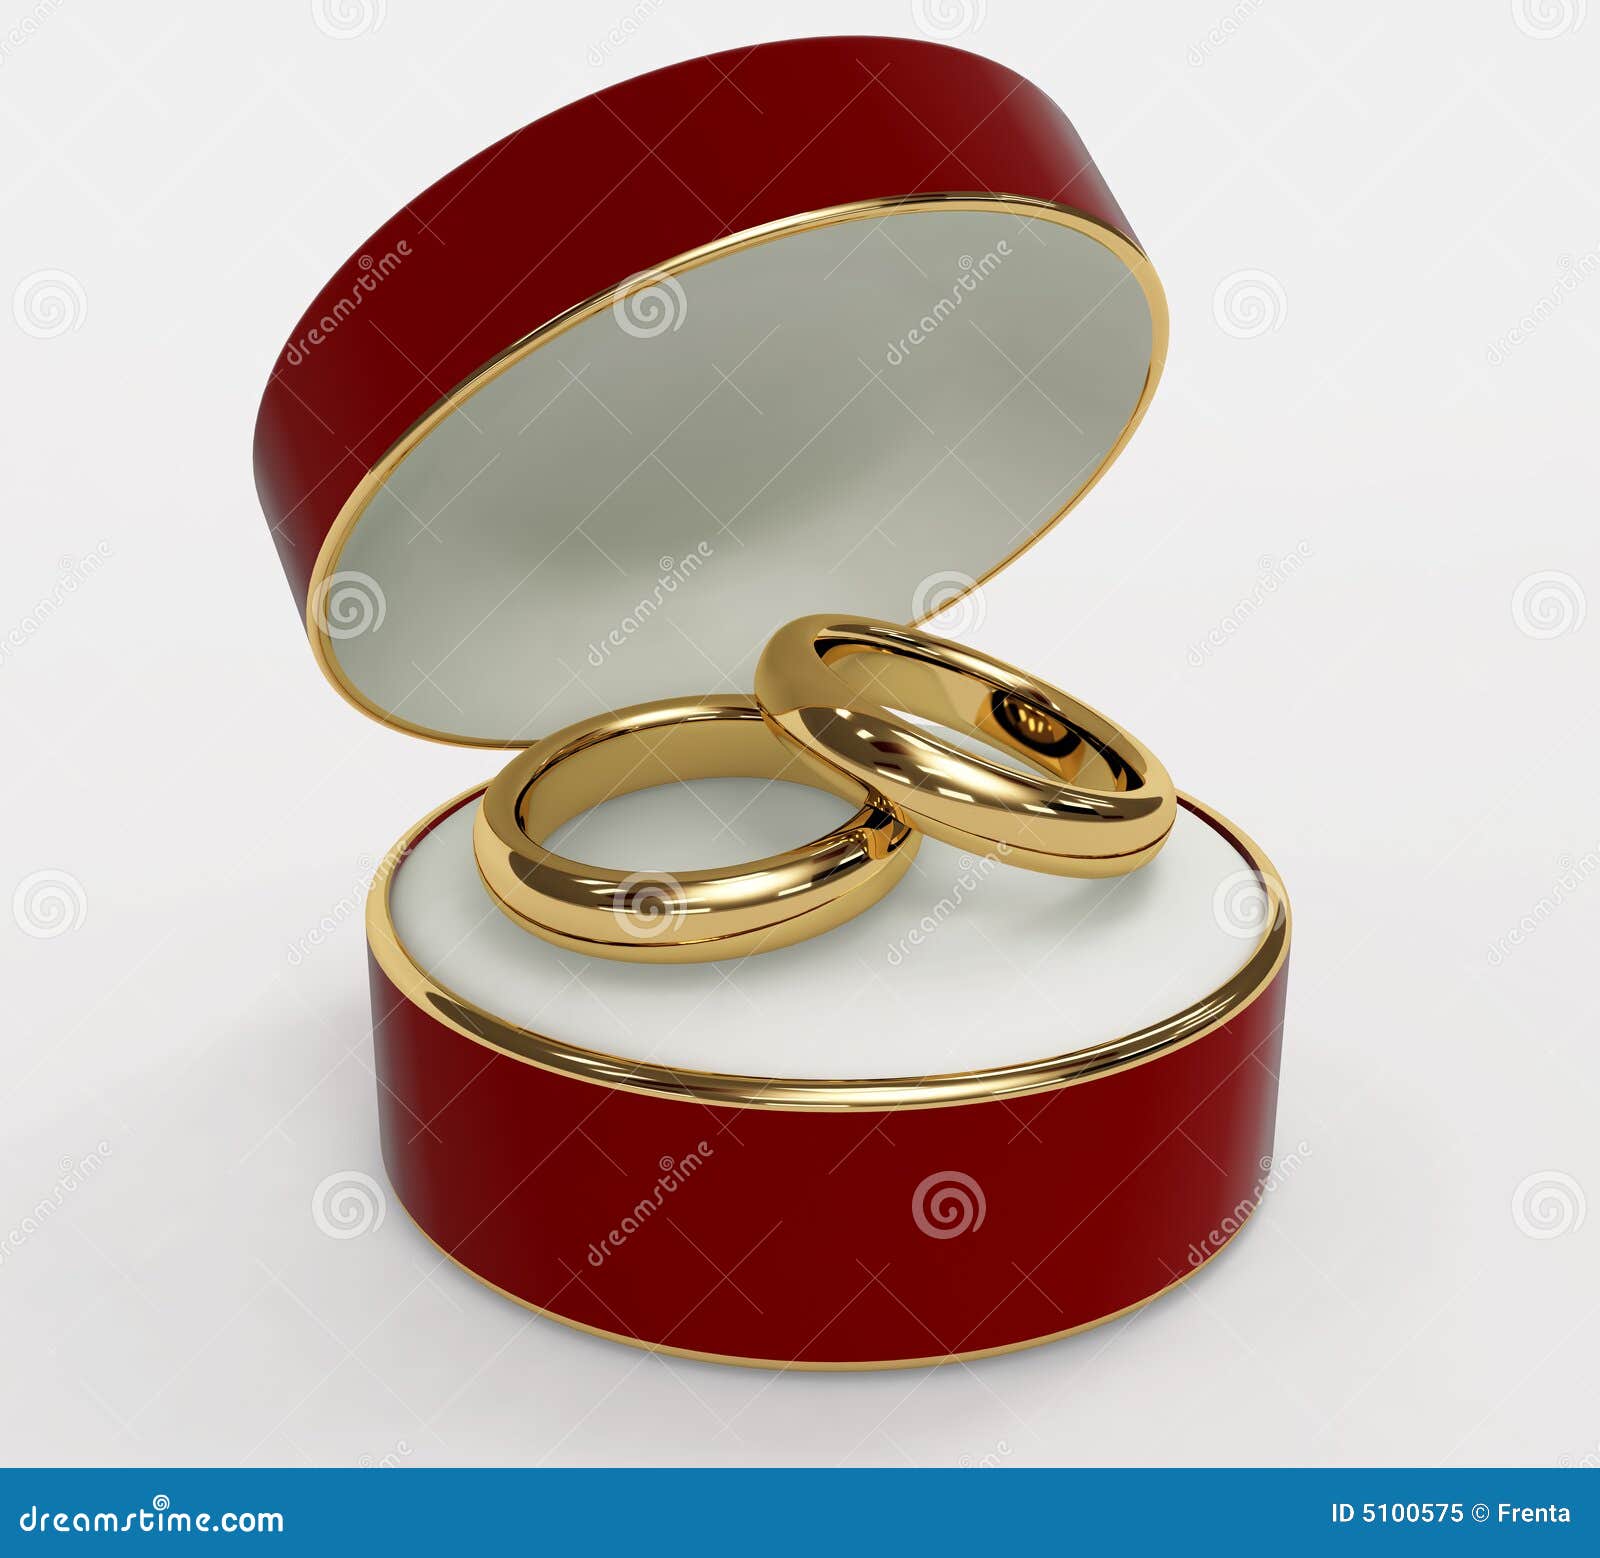 ... casket with two wedding rings object over white mr no pr no 2 1691 2